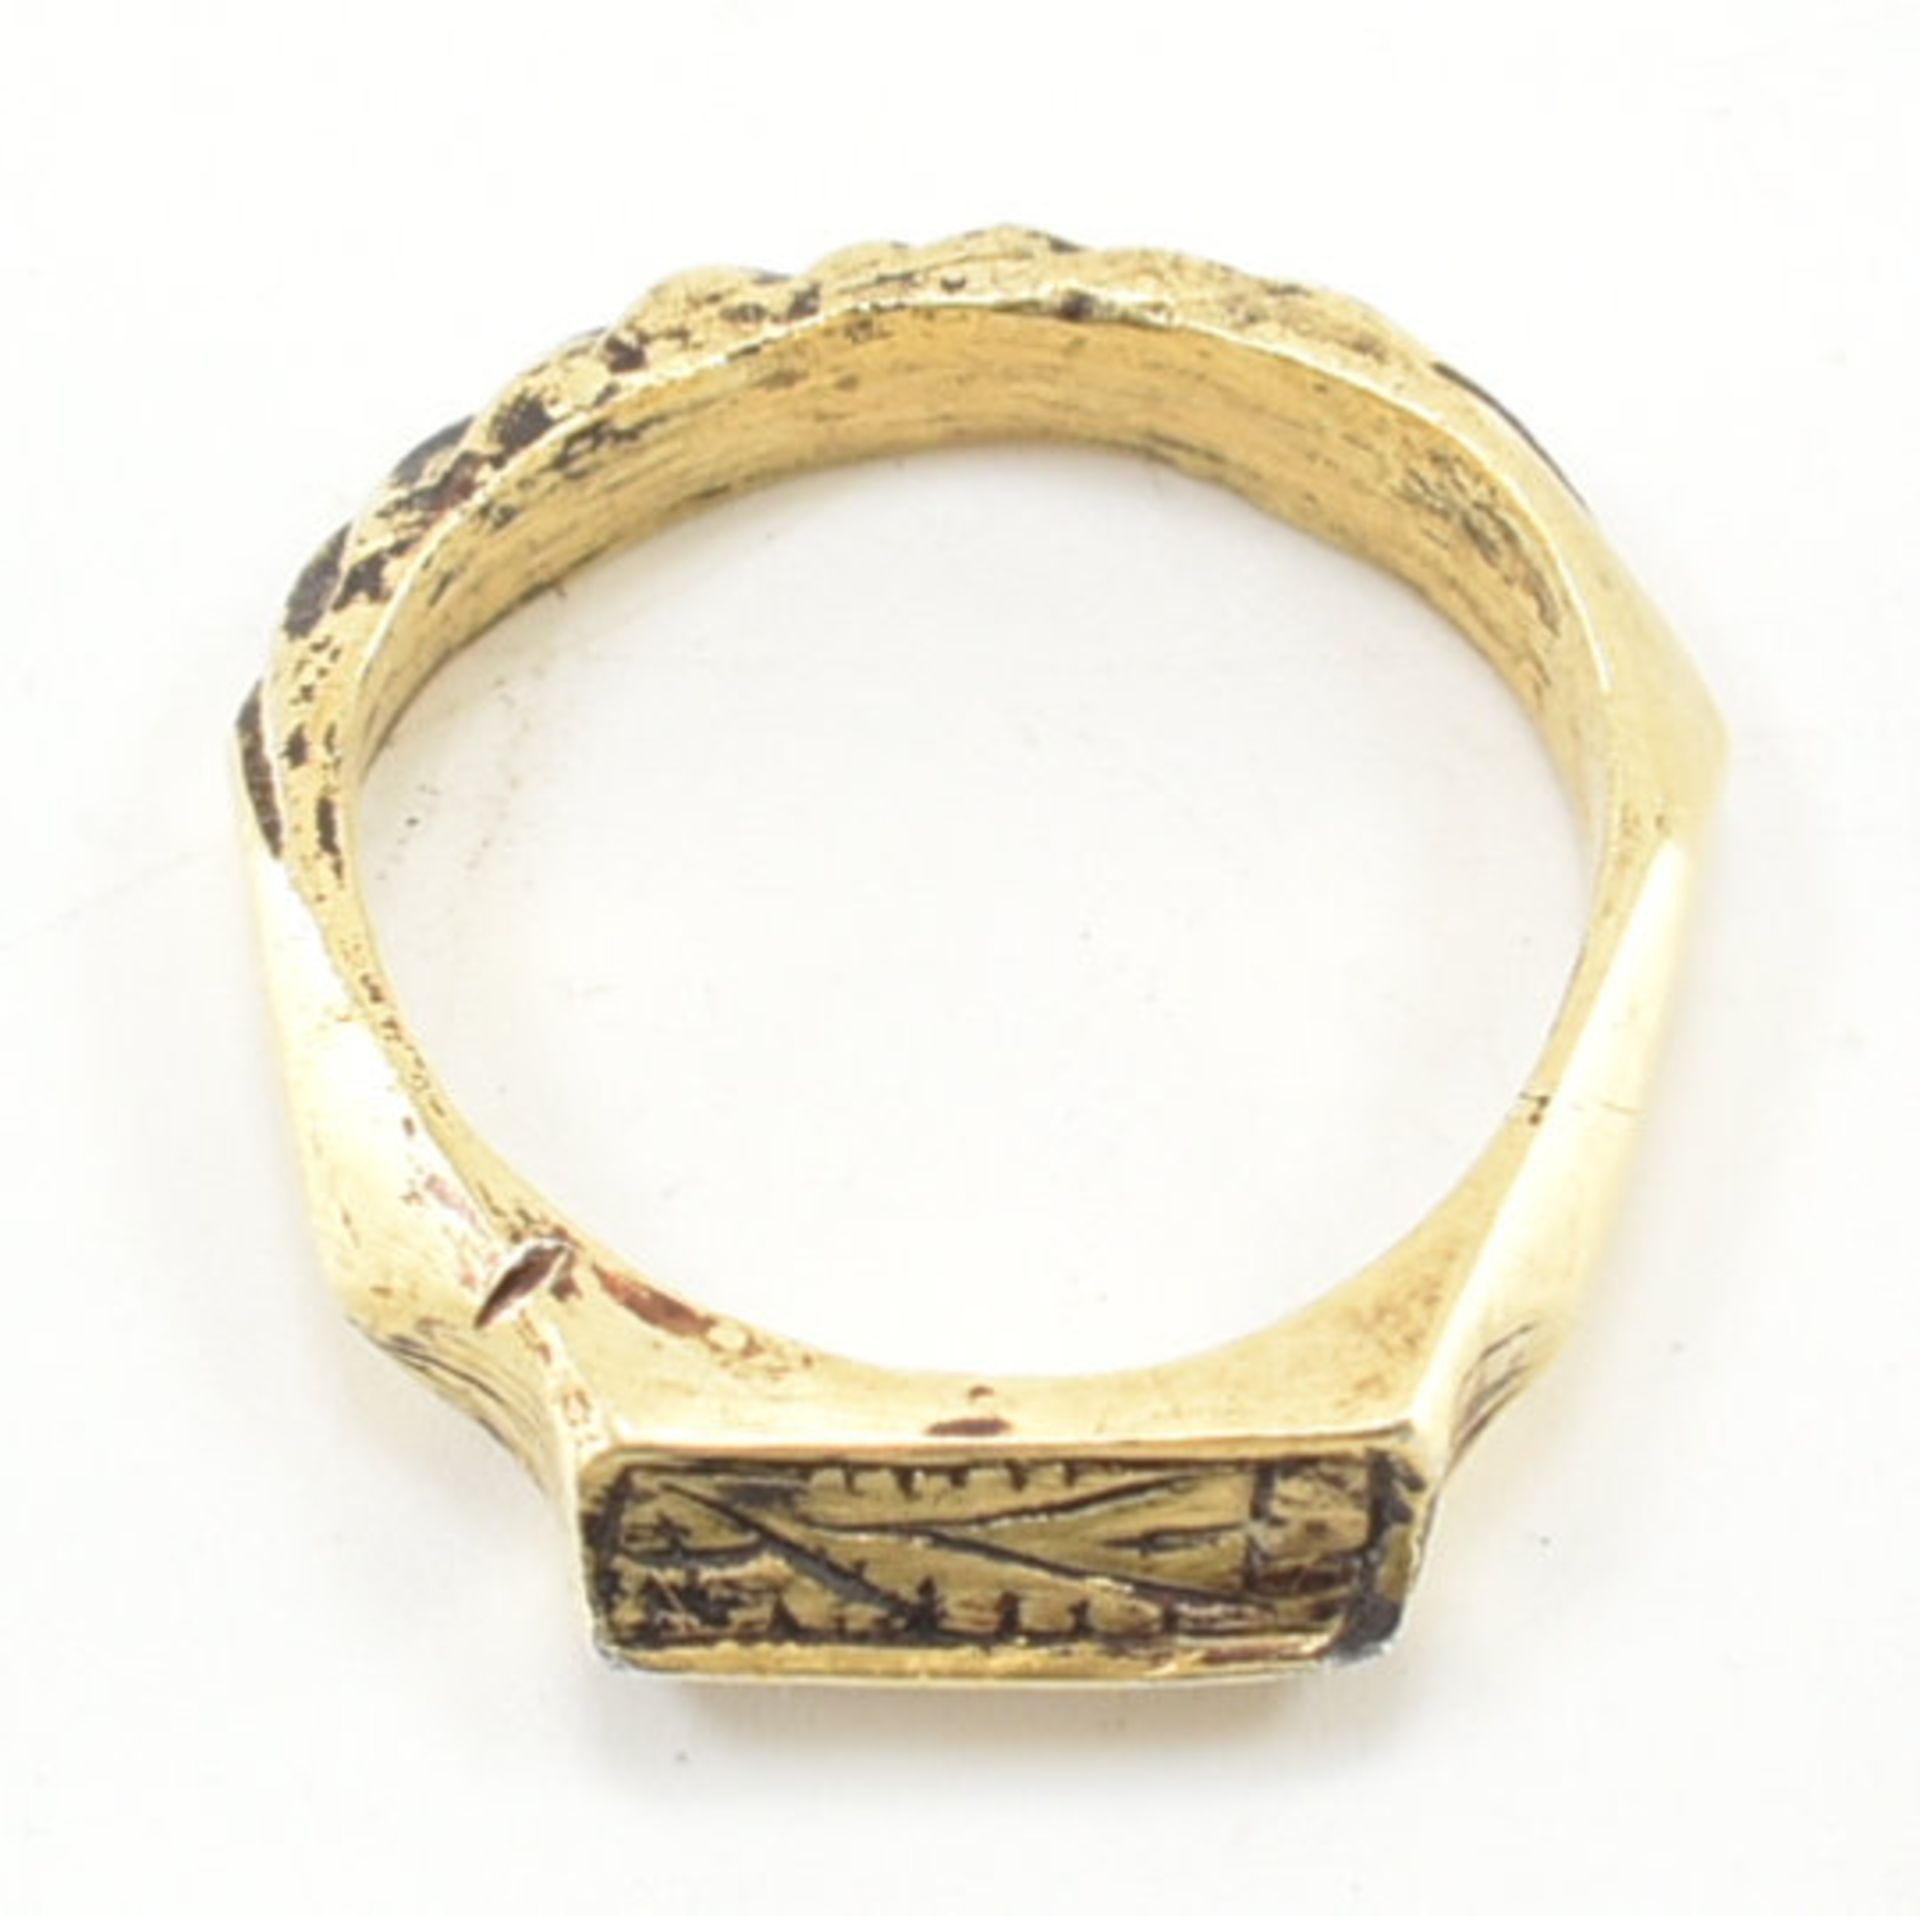 MEDIEVAL 14TH CENTURY ICONOGRAPHIC RING - Image 8 of 9